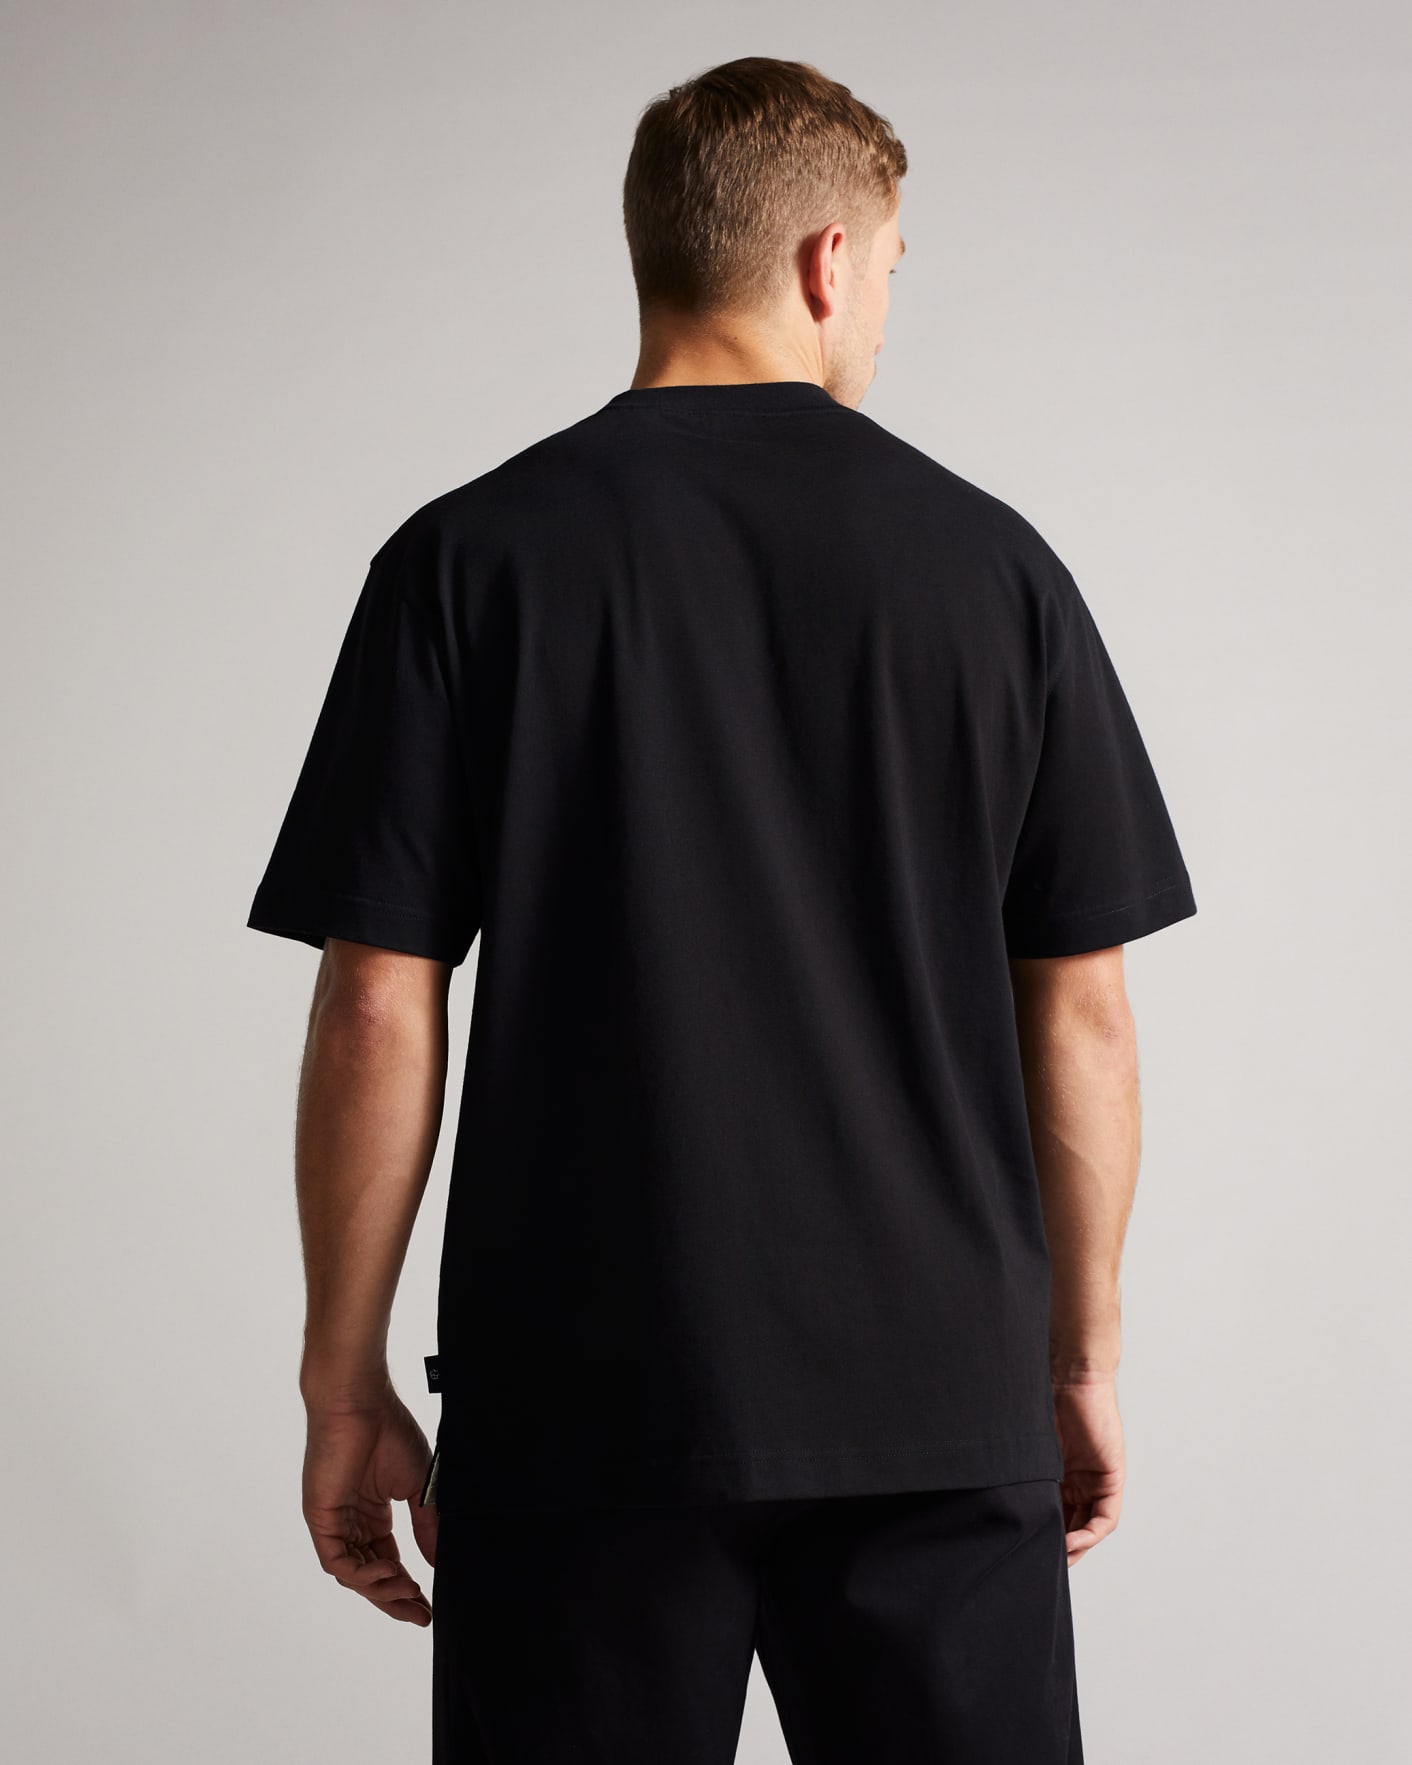 Black Short Sleeve Heavy Weight Relaxed Fit Graphic T Shirt Ted Baker